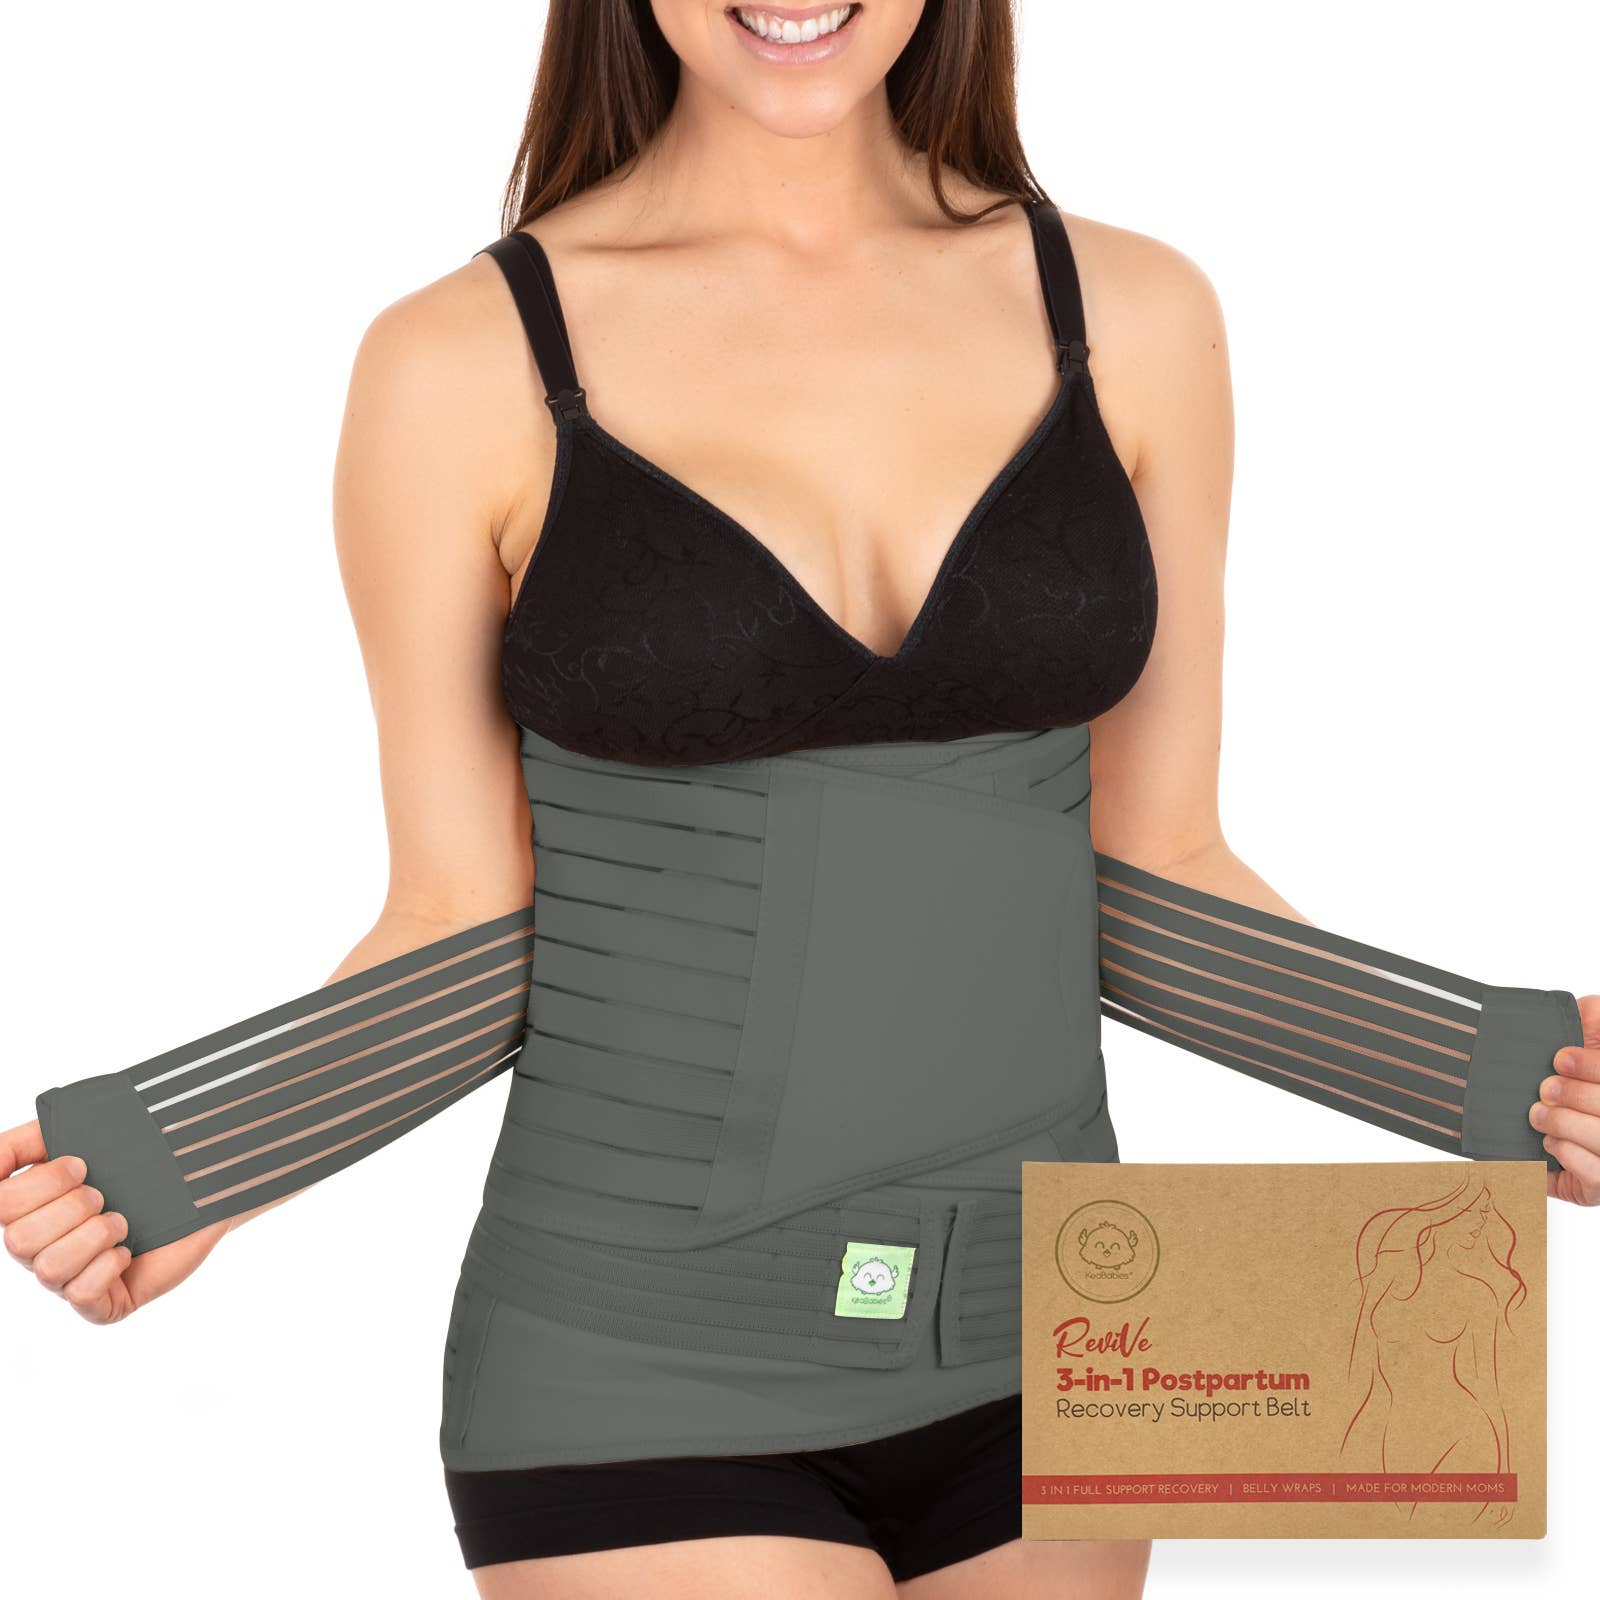 Revive 3-in-1 Postpartum Recovery Support Belt (Mystic Gray)